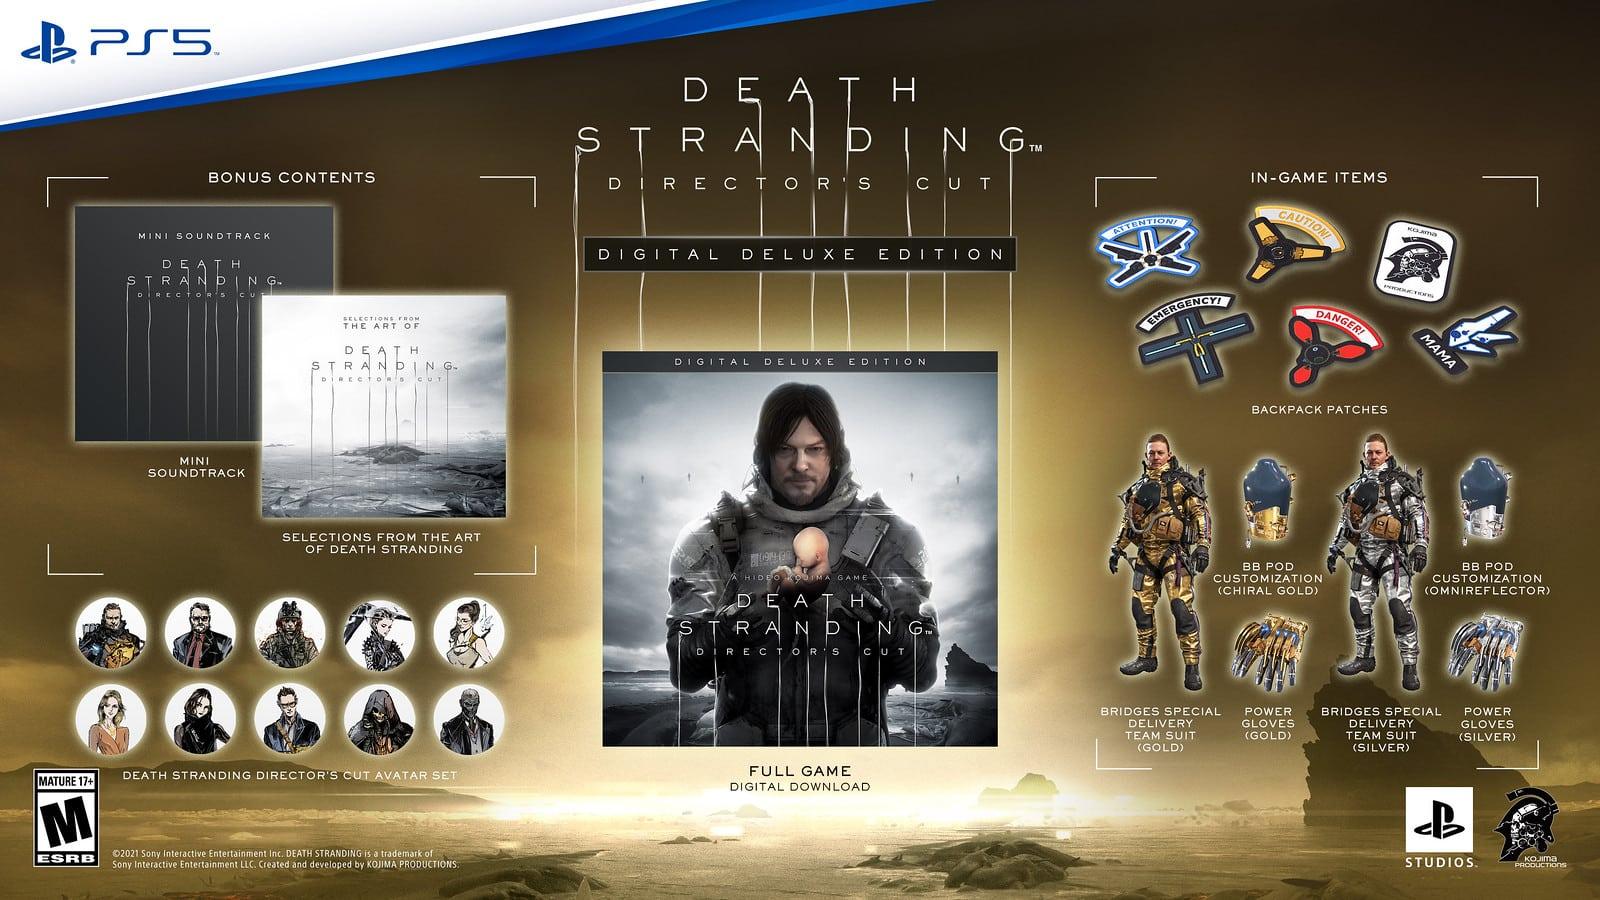 Death Stranding Director's Cut image with included contents